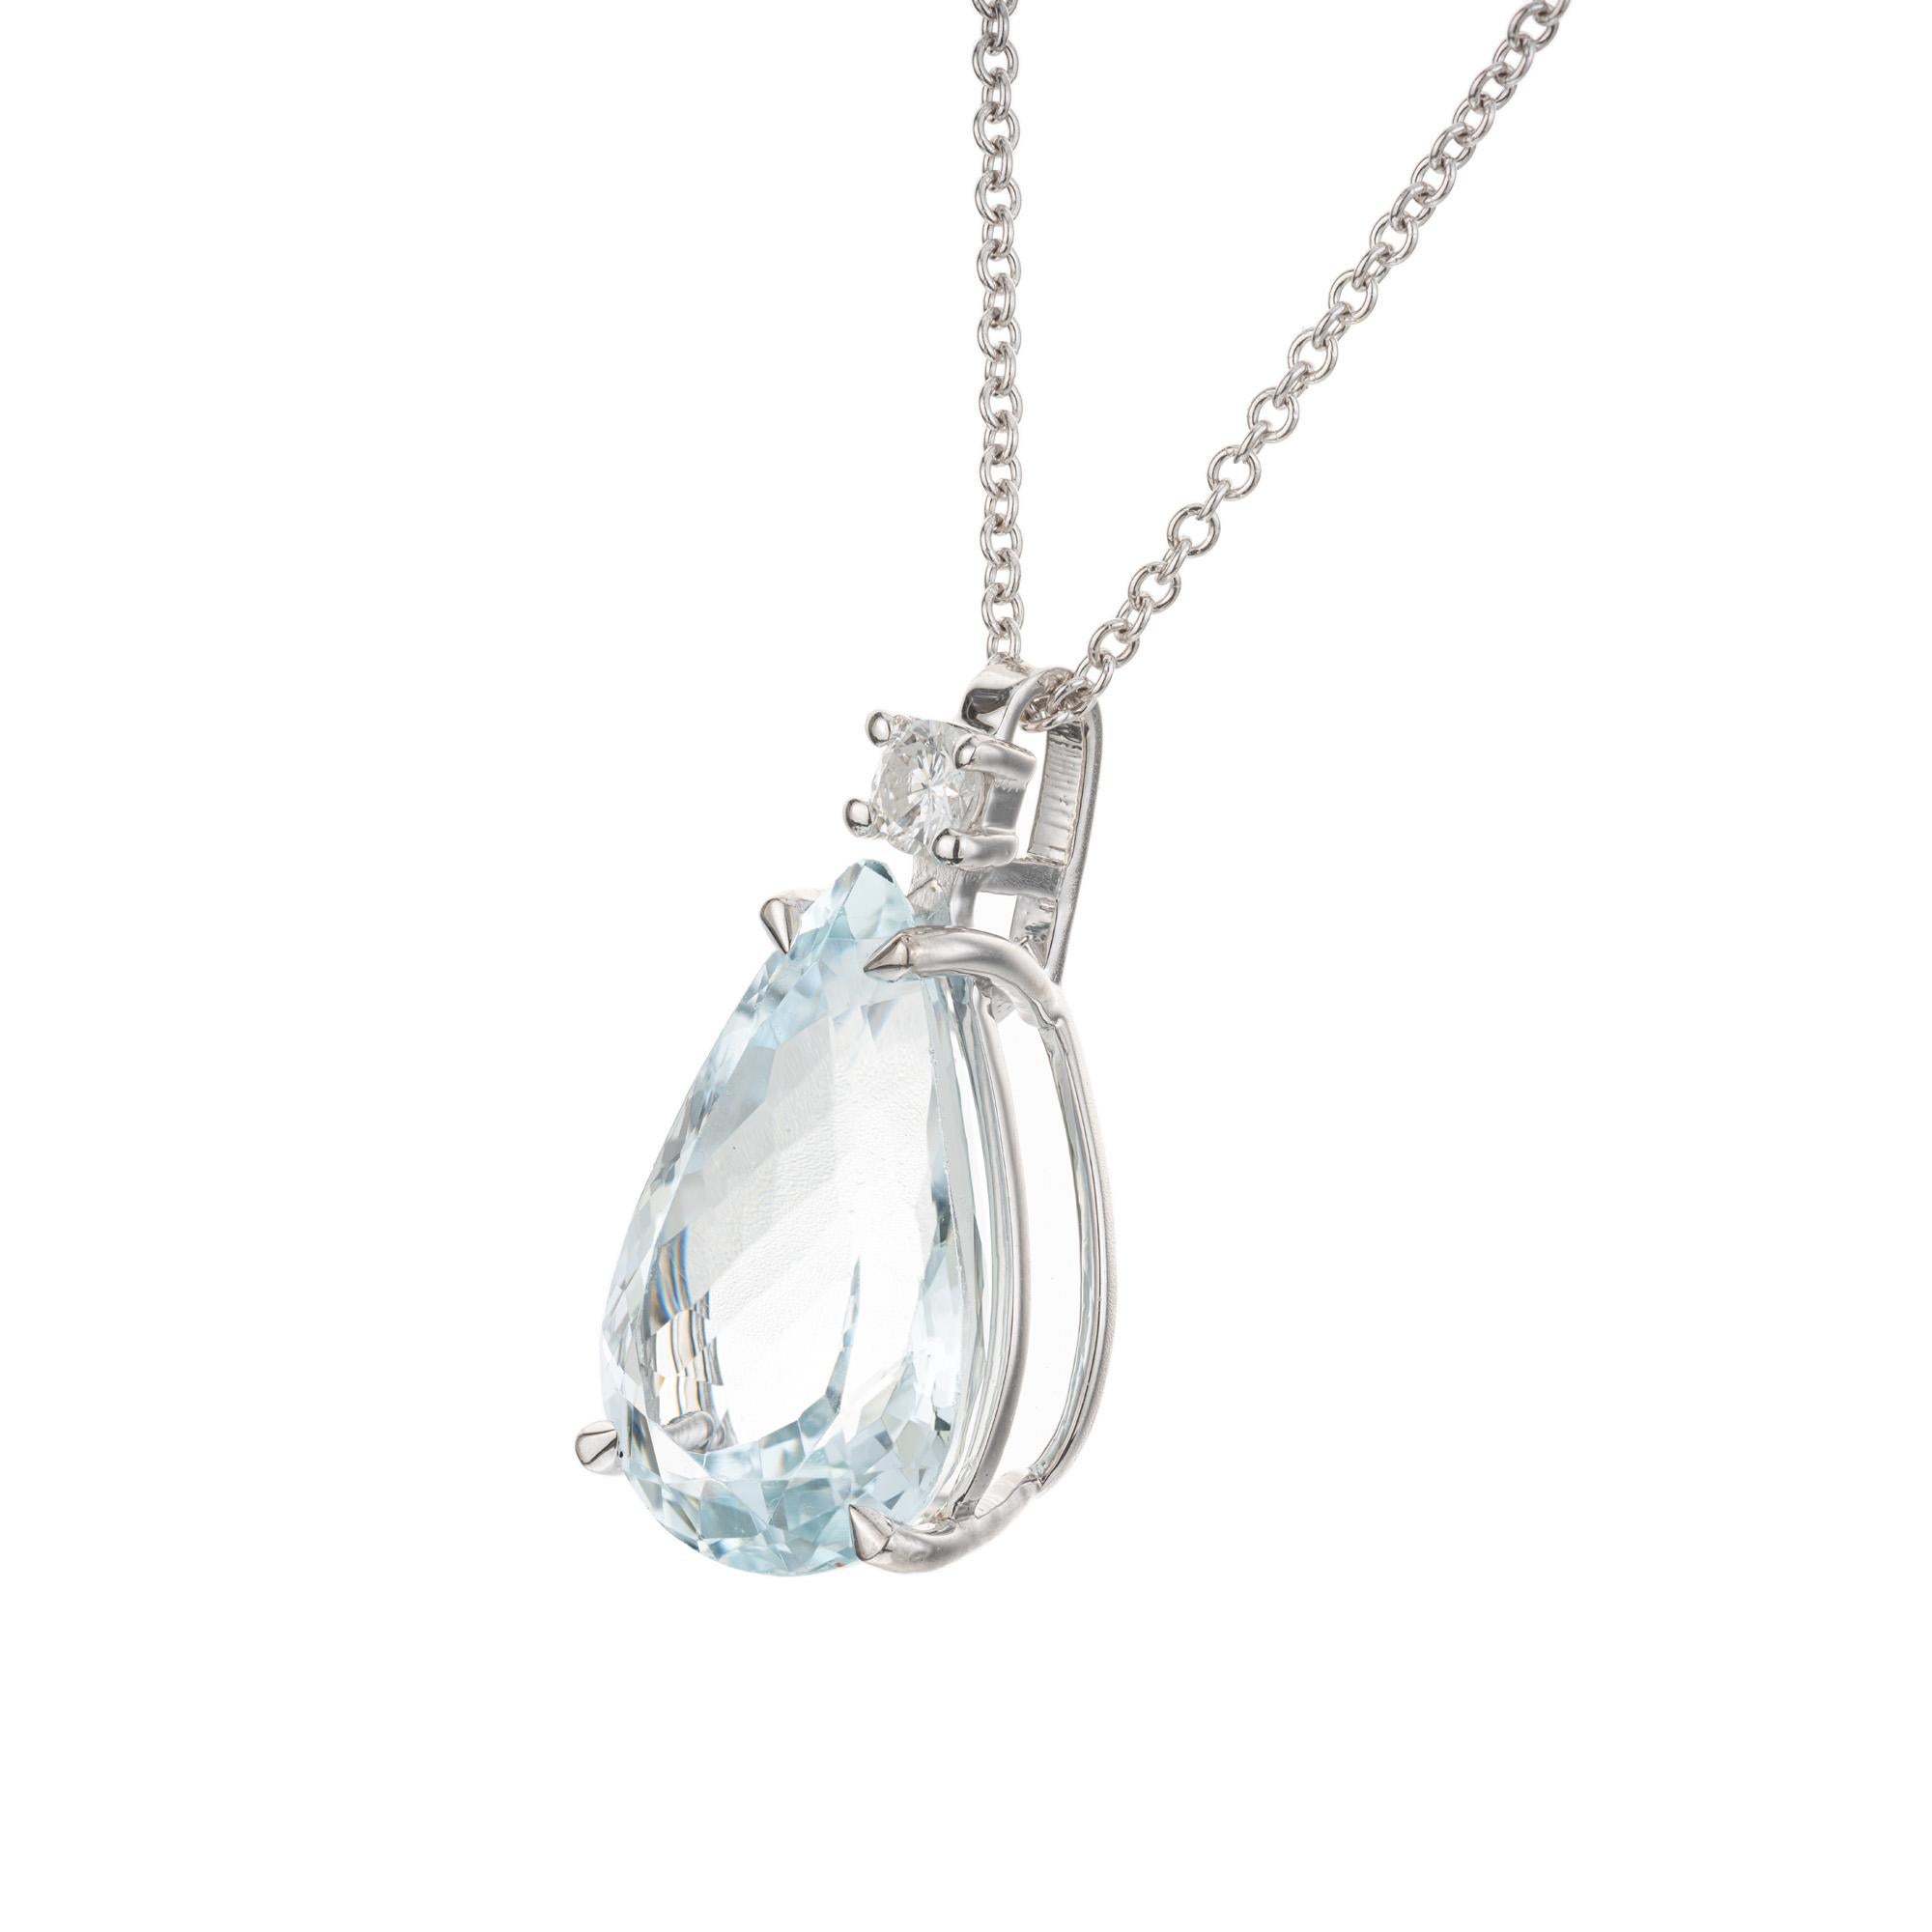 This pendant necklace features a mesmerizing 6.98 carat pear shaped aquamarine gemstone that is set in a 14k white gold four prong setting which is accented by a round brilliant cut diamond. The Aqua has a serene and calming blue hue. The setting